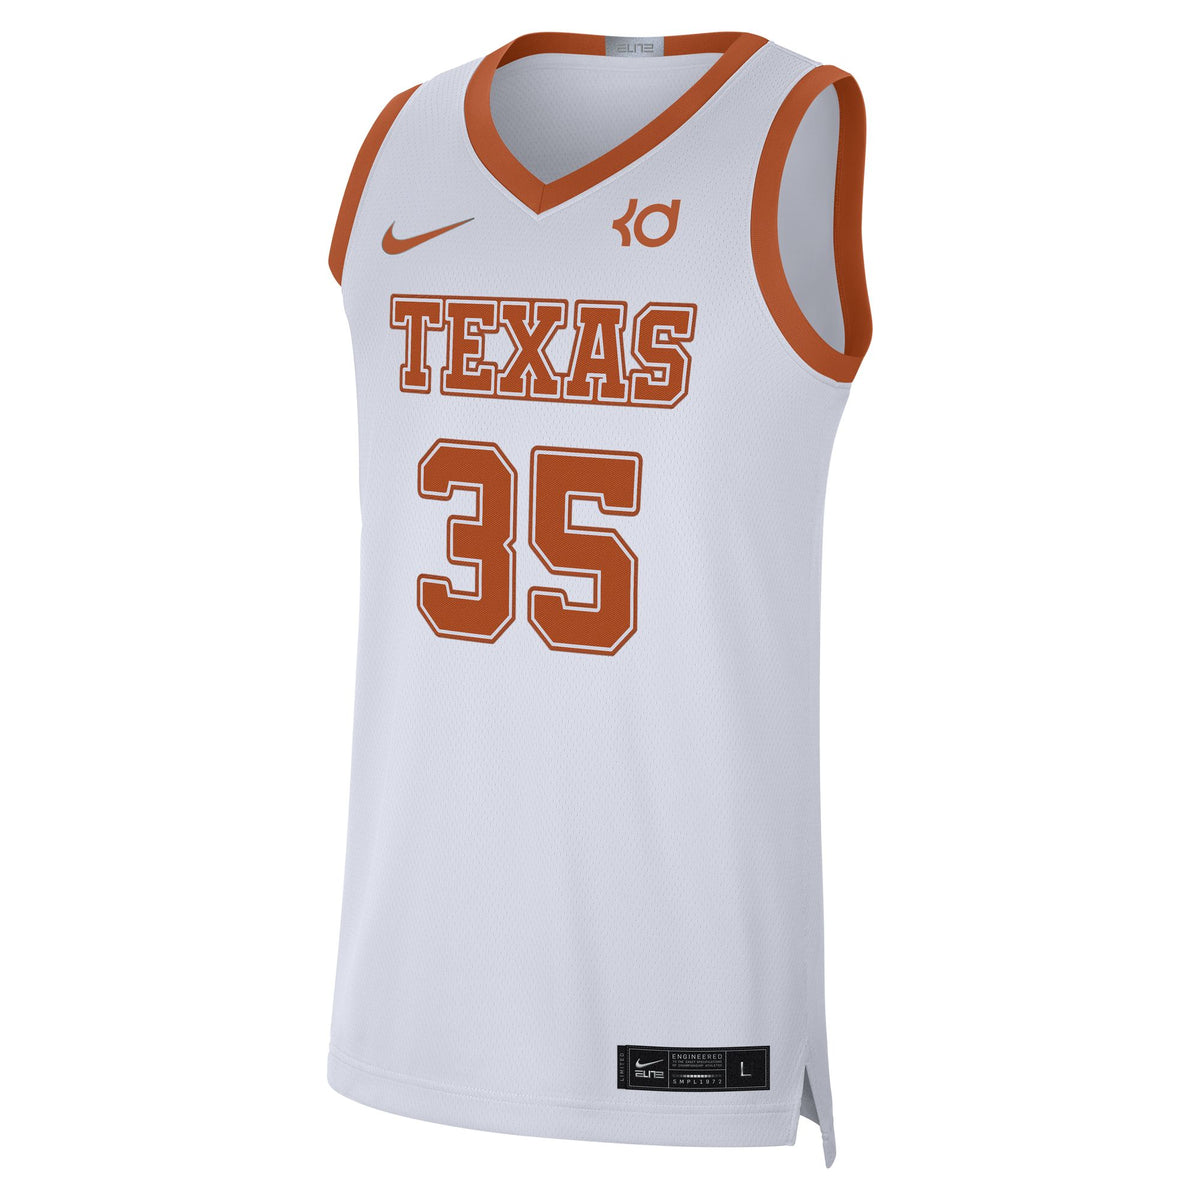 Texas Longhorns Nike Kevin Durant Limited Jersey